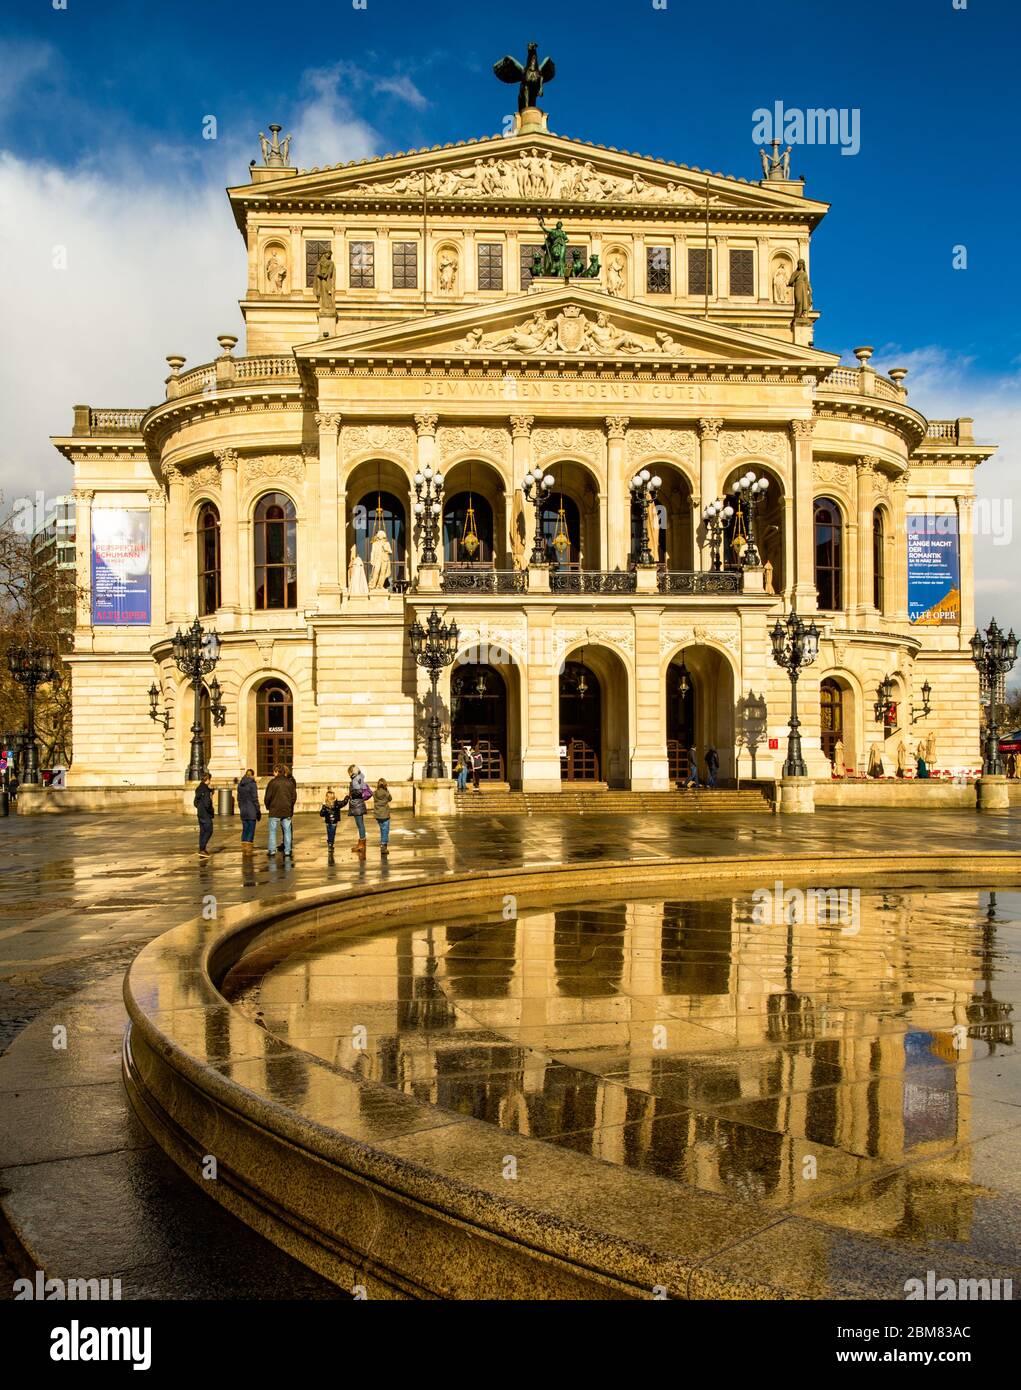 The Alte Oper, Frankfurt am Main, Germany, with reflection in wet paved area. It is the original opera house in Frankfurt and is now a concert hall. Stock Photo